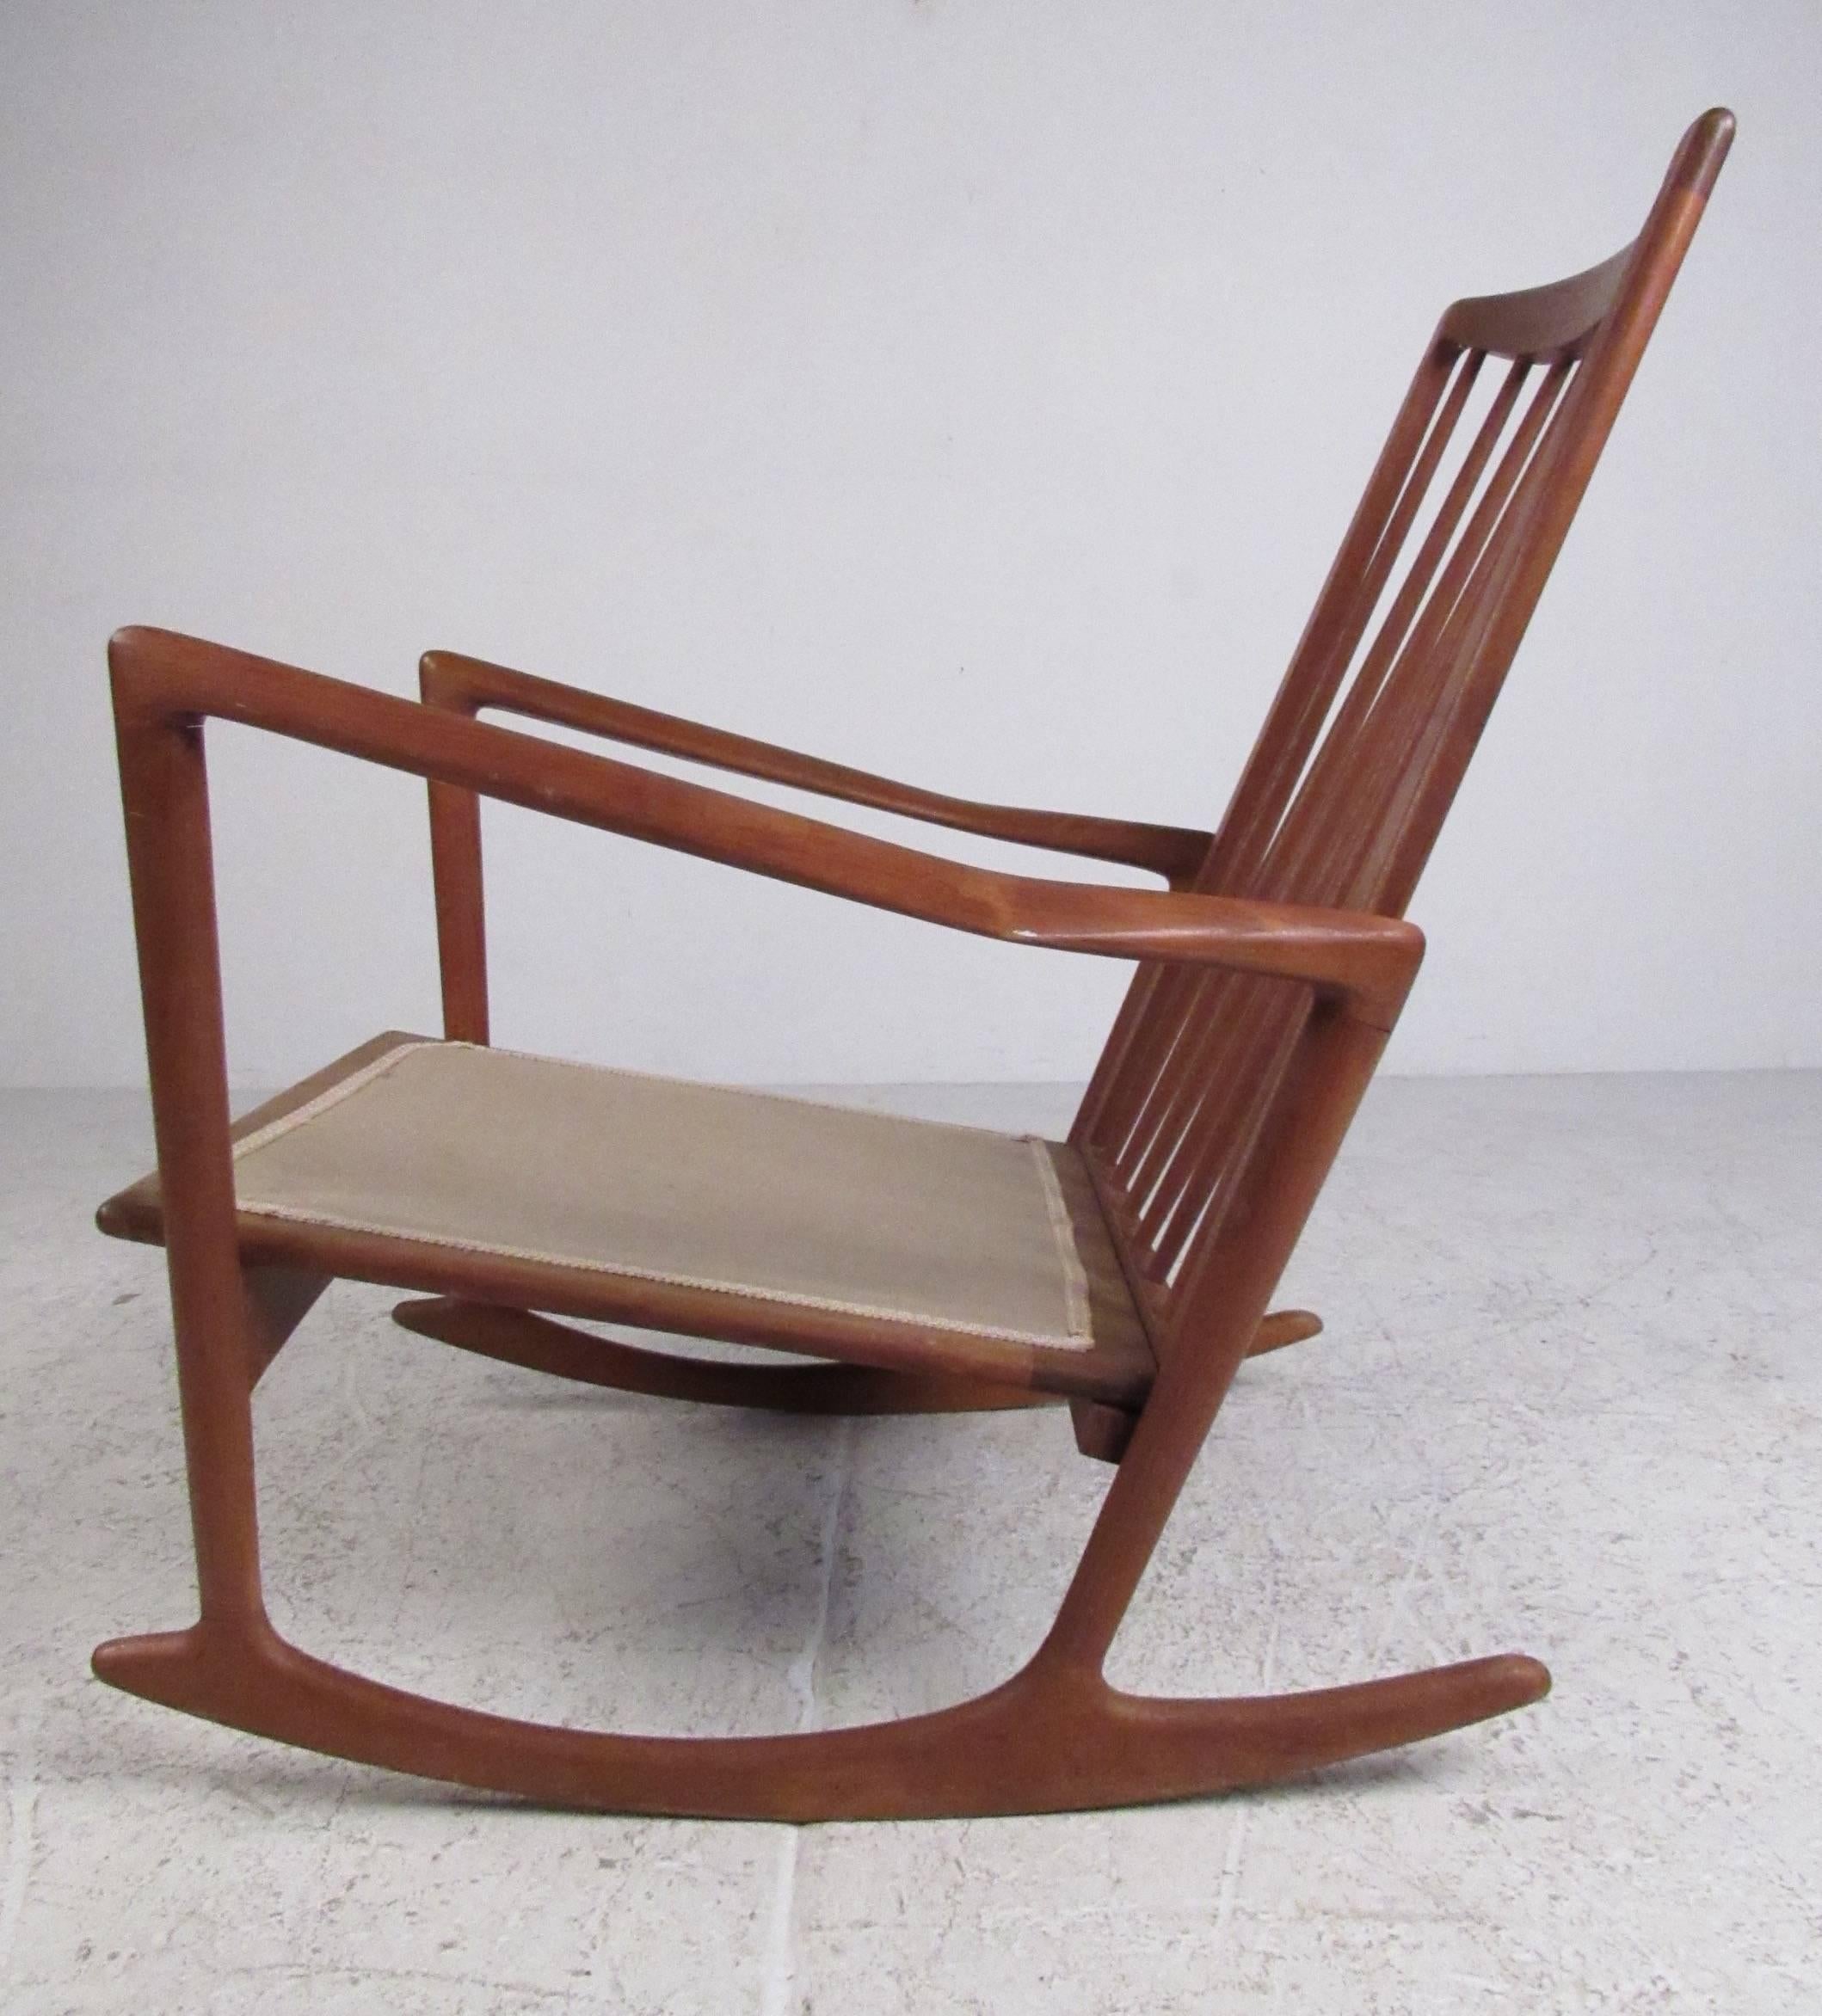 Mid-Century Scandinavian modern solid teak rocking chair designed by Ib Kofod Larsen and produced by Selig. Sculptural profile with high spindle back, this Classic chair retains its original manufacturers label. Please confirm item location (NY or